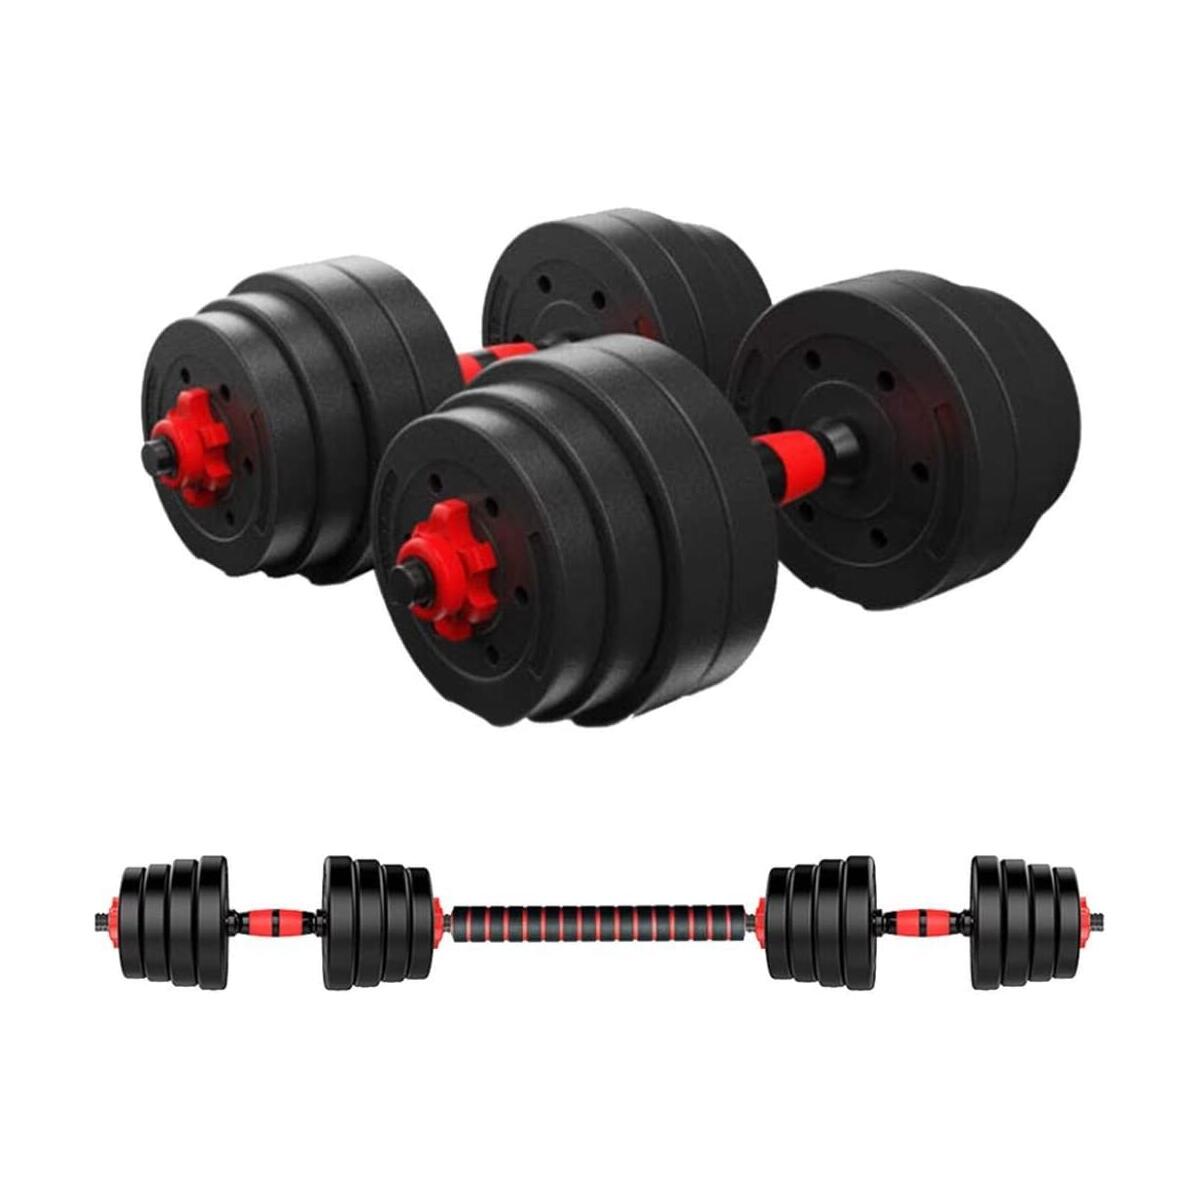 Adjustable Dumbbells Coupons & Offers